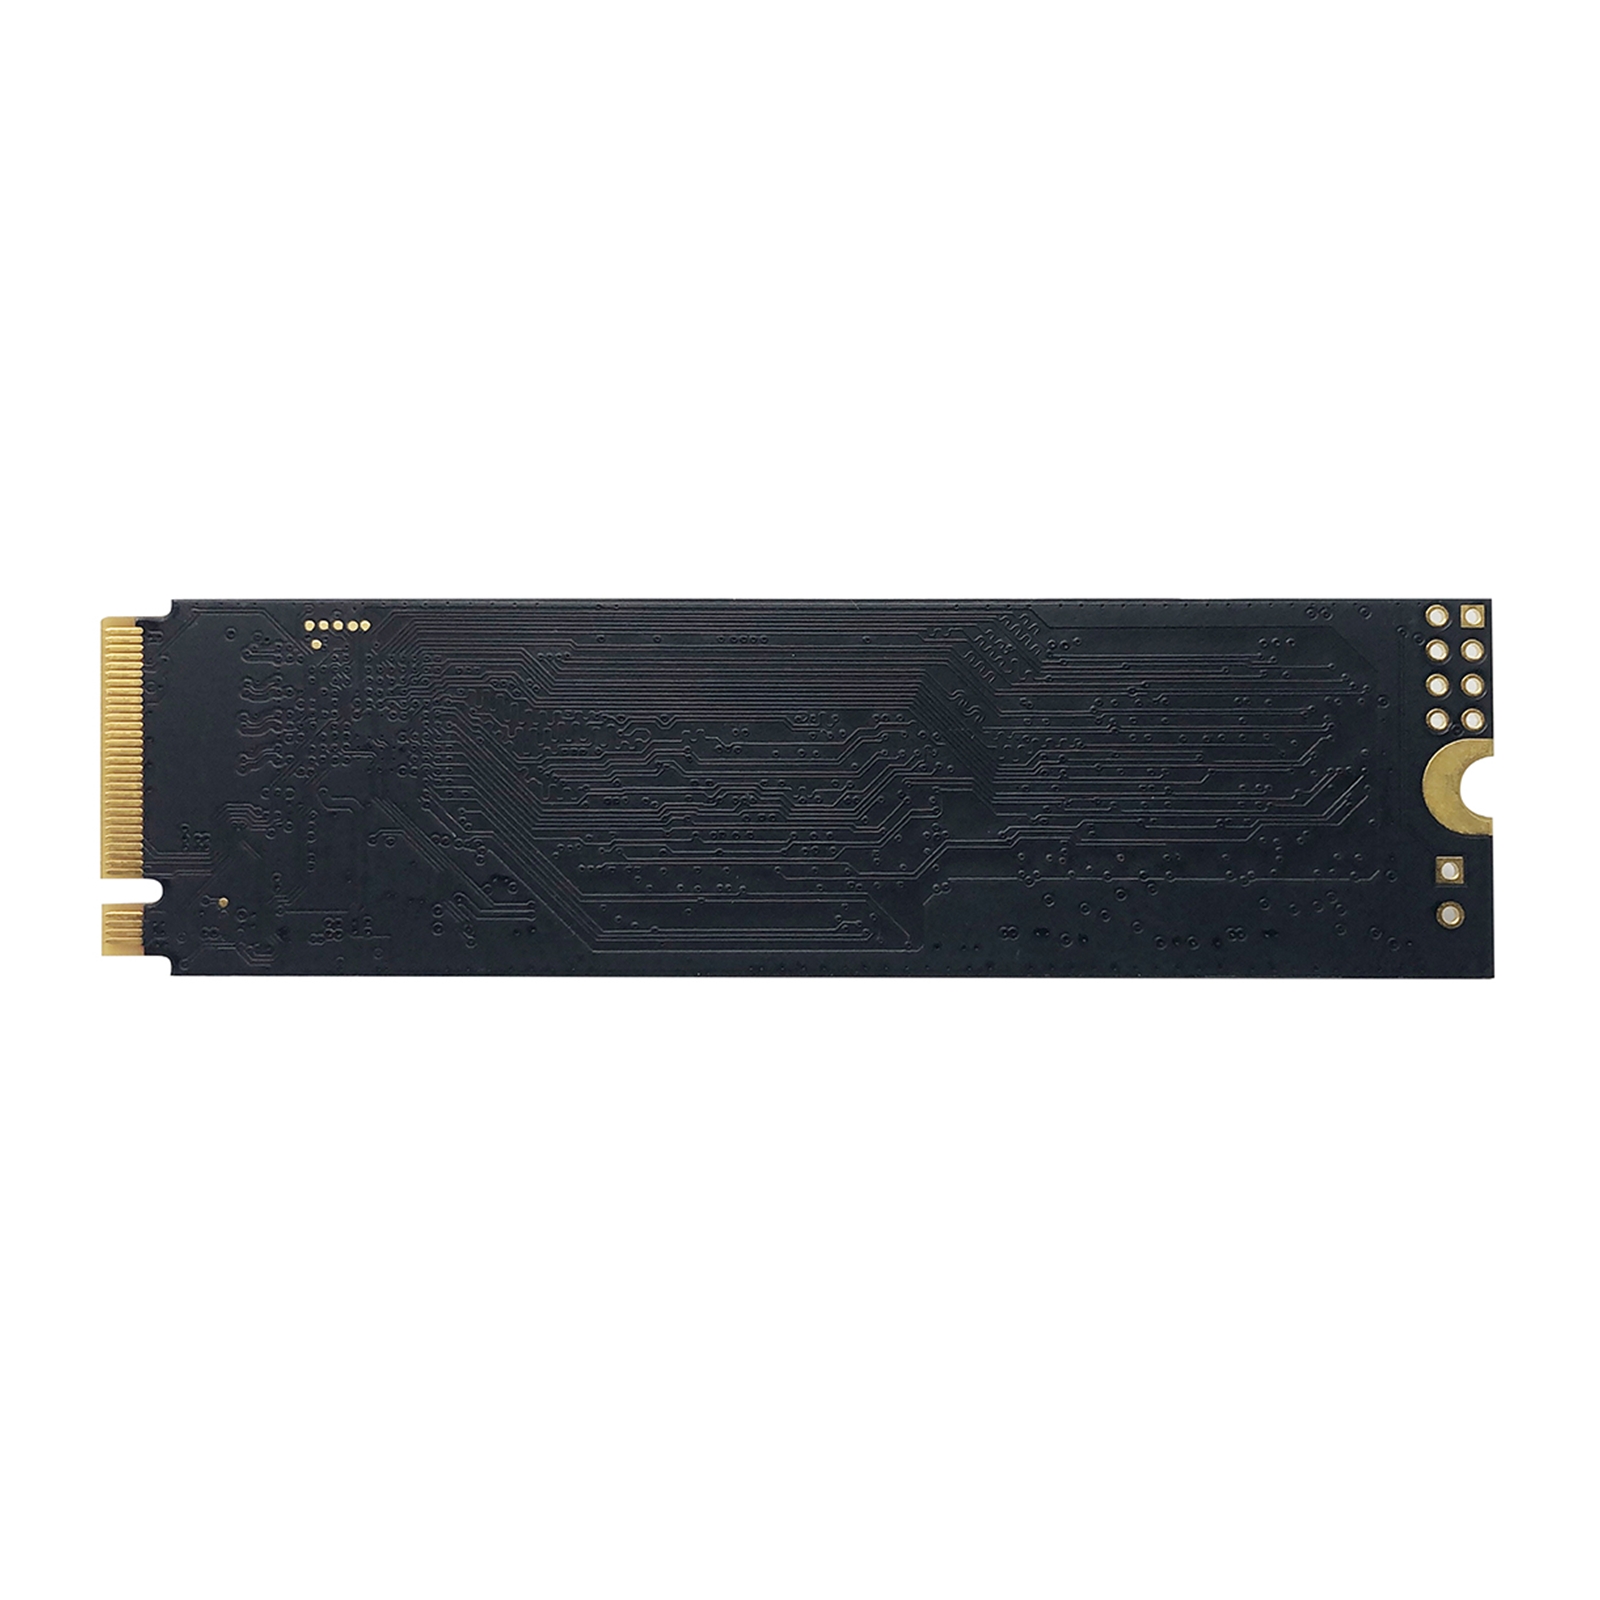 Patriot P300 (P300P128GM28) 128GB NVMe M.2 Interface, PCIe x3, 2280 Length, Read 1600MB/s, Write 600MB/s, 3 Year Warranty